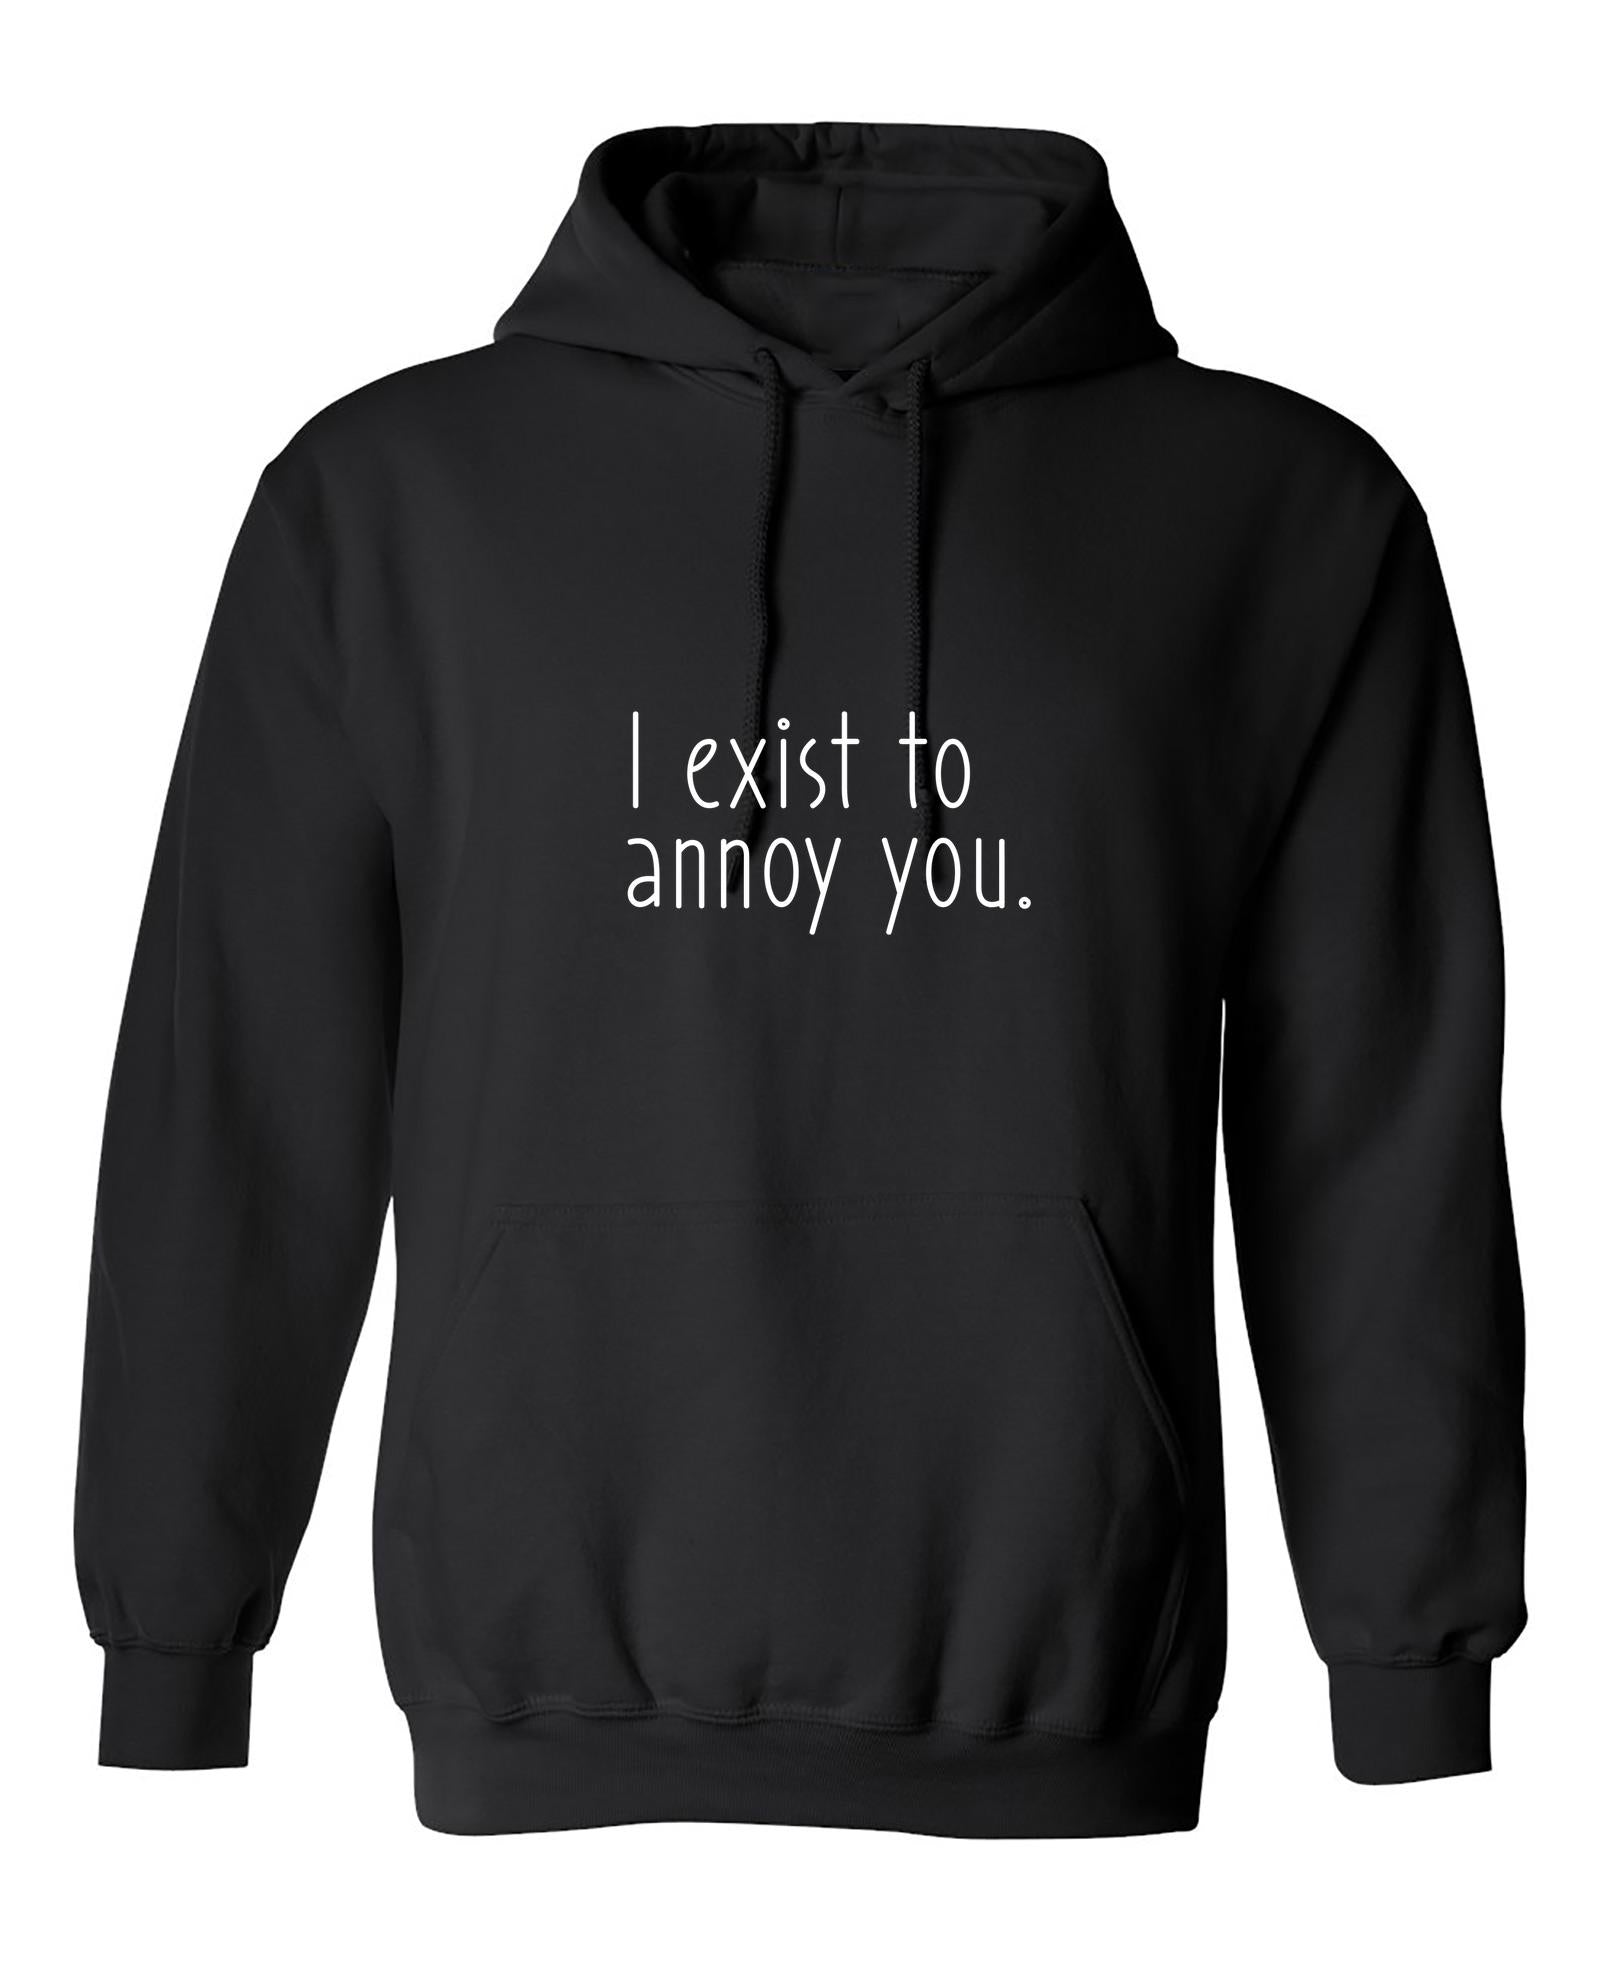 Funny T-Shirts design "I exist to annoy you."